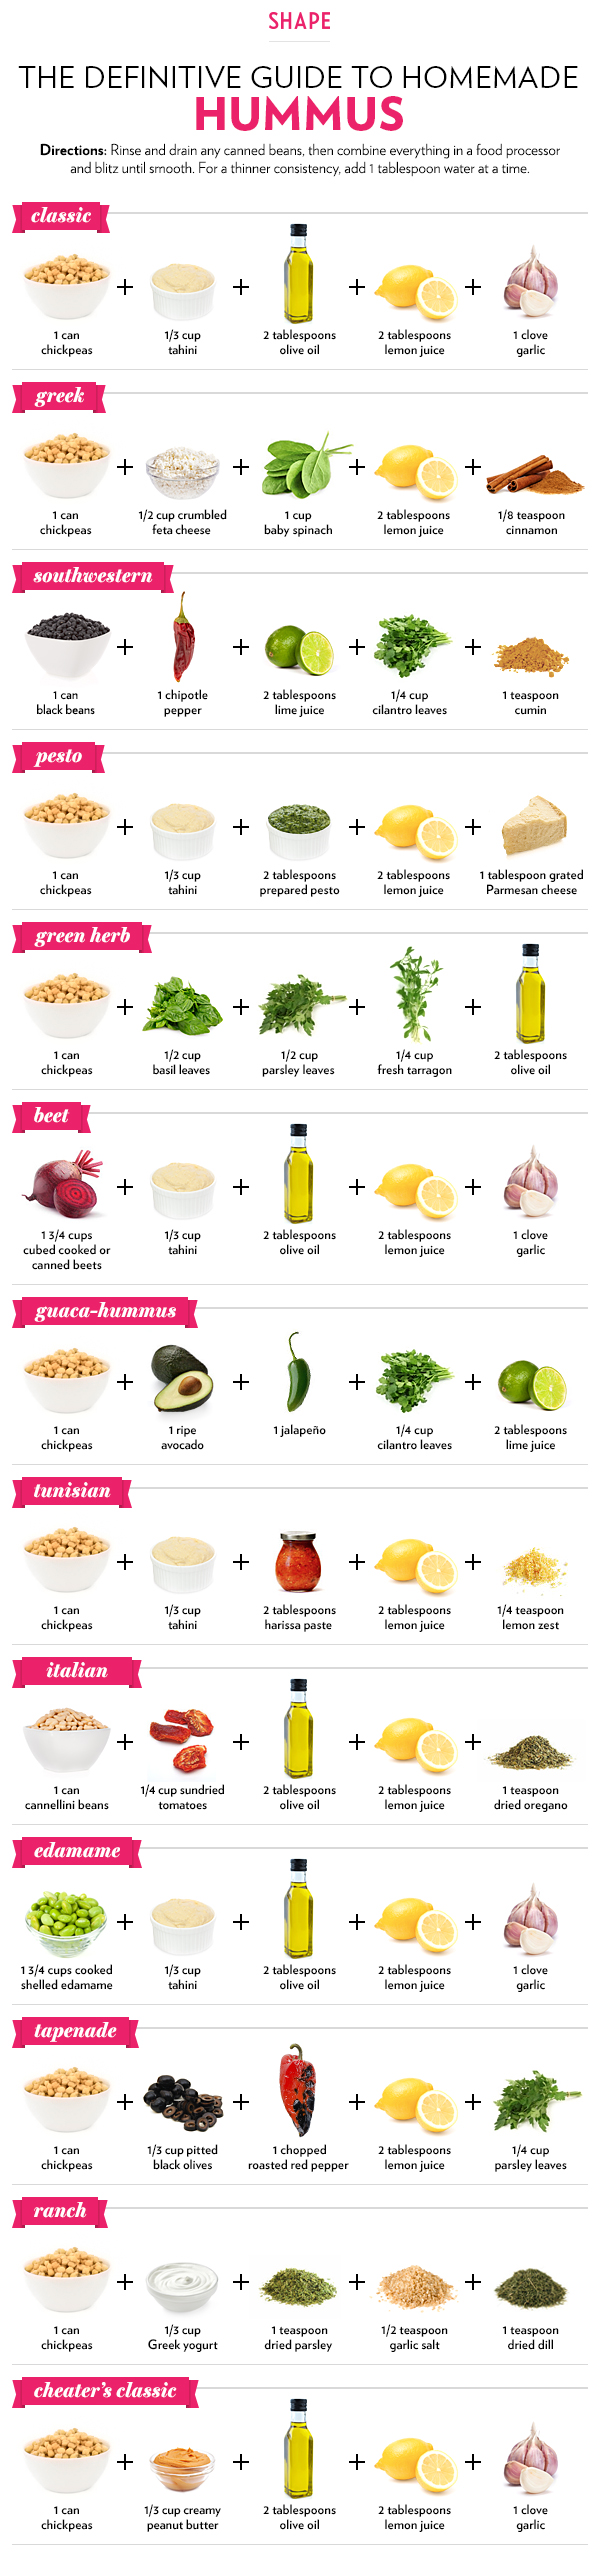 The Definitive Guide to Homemade Hummus